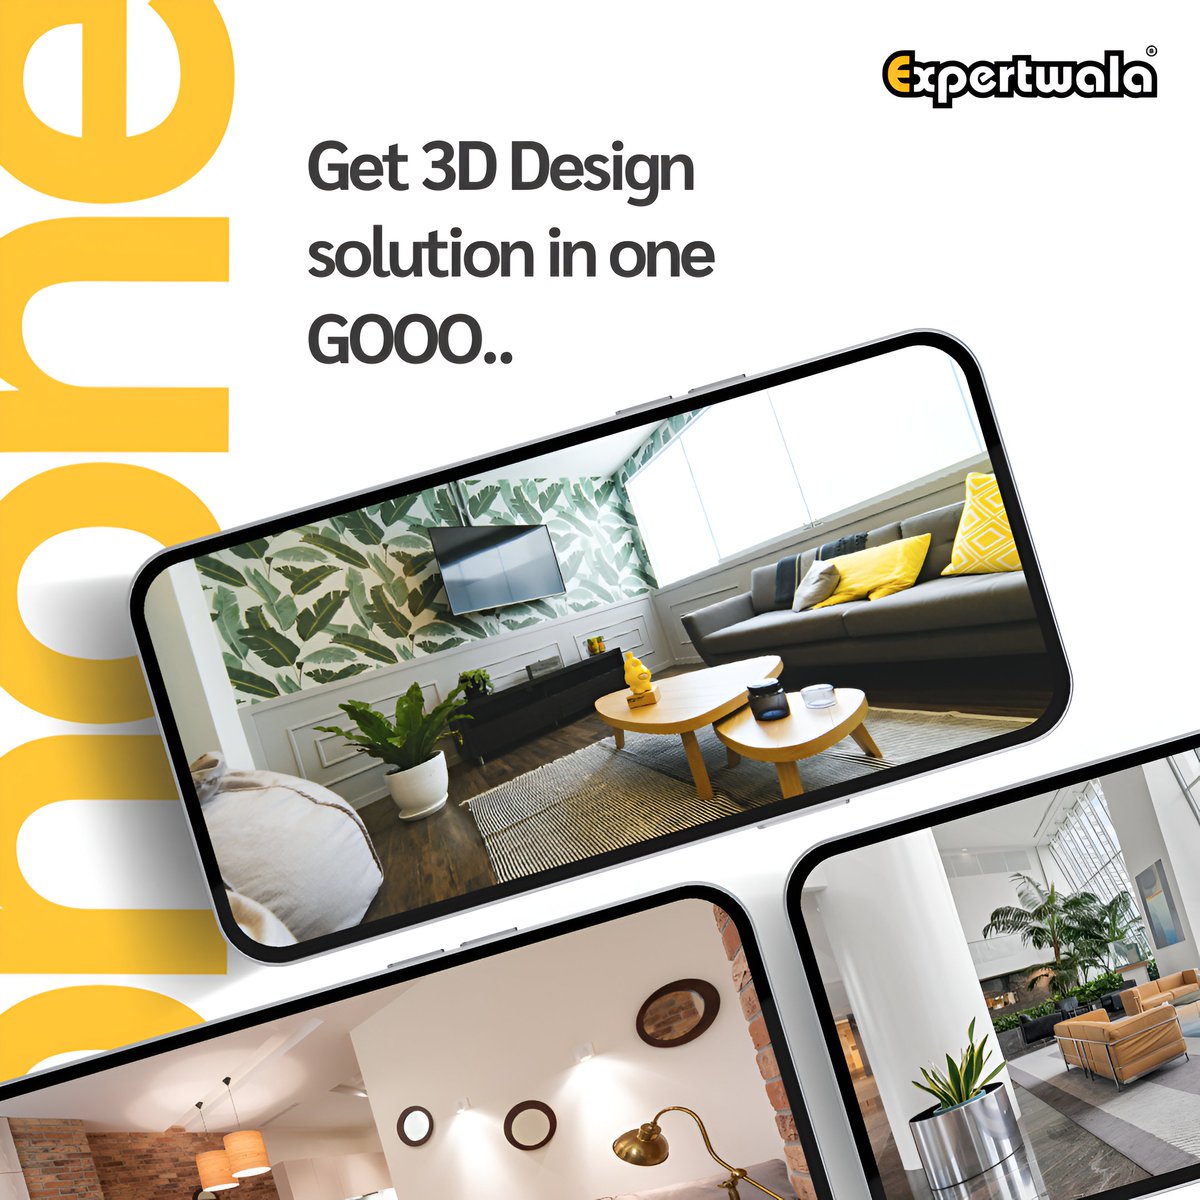 Transform your vision into reality with expert 3D interior design services! Hire the expert now!

#3ddesign #2ddesign #architecture #houseplanning